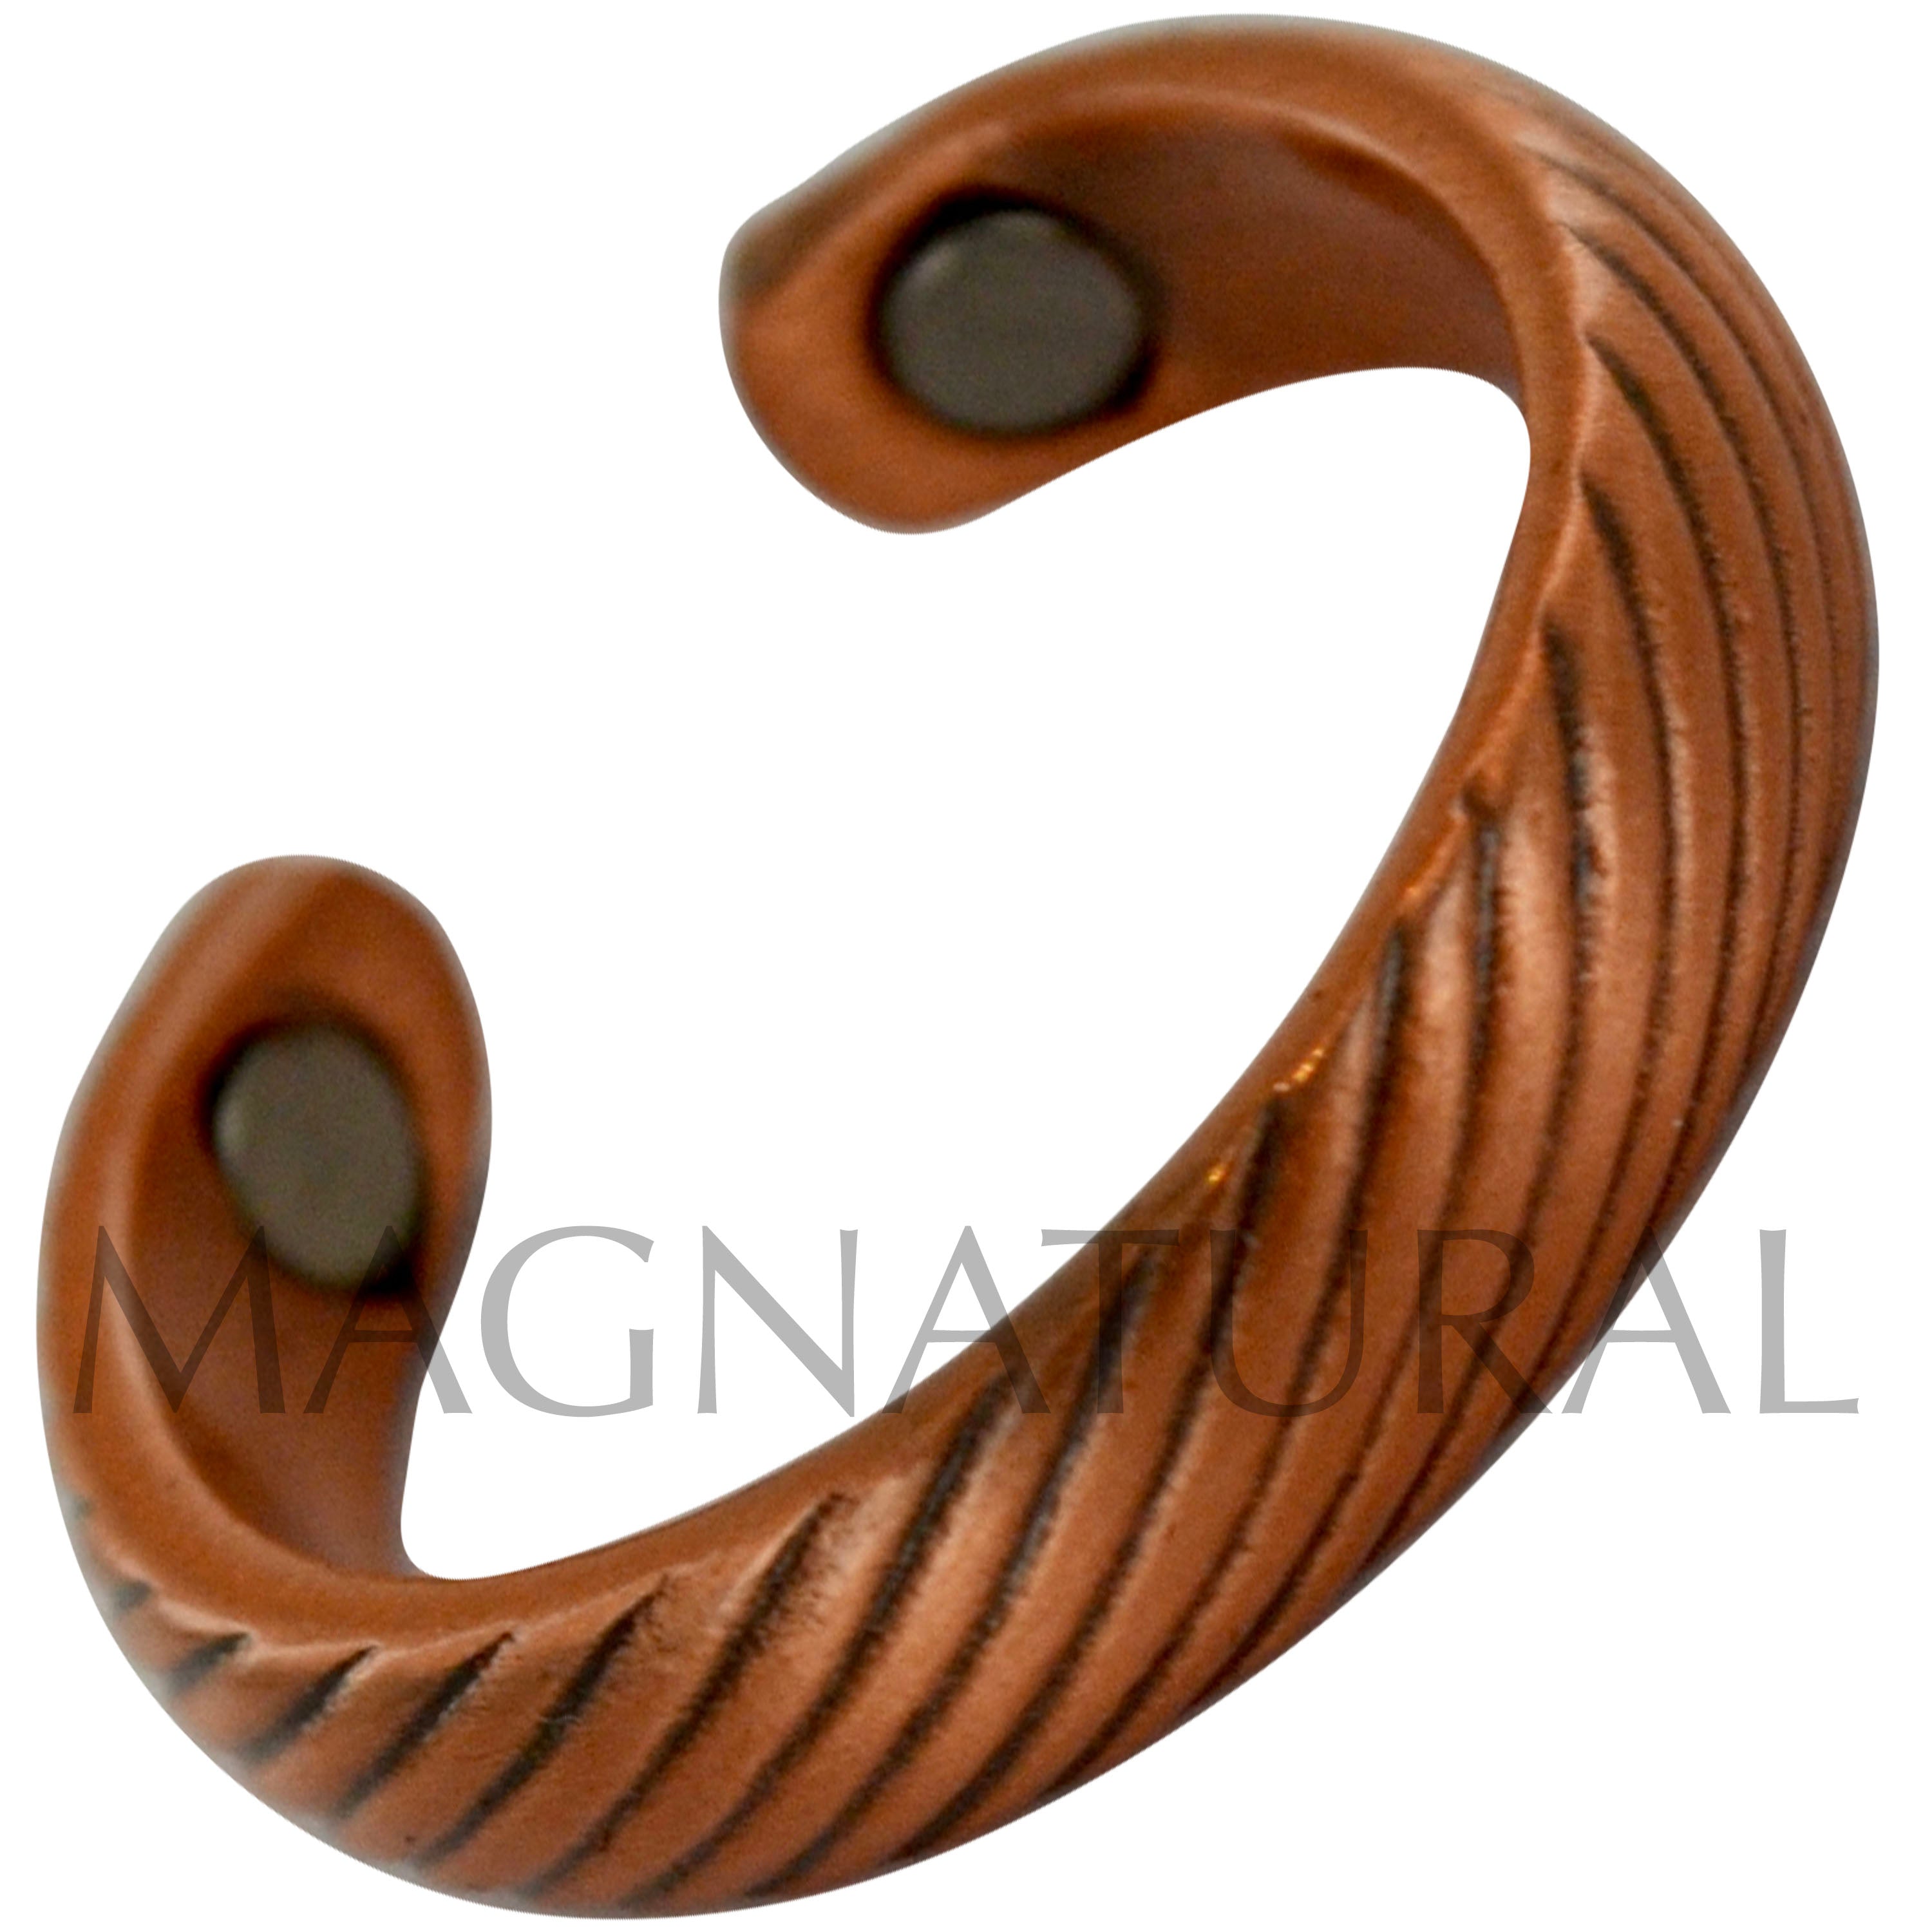 Magnetic Copper Ring - Twist